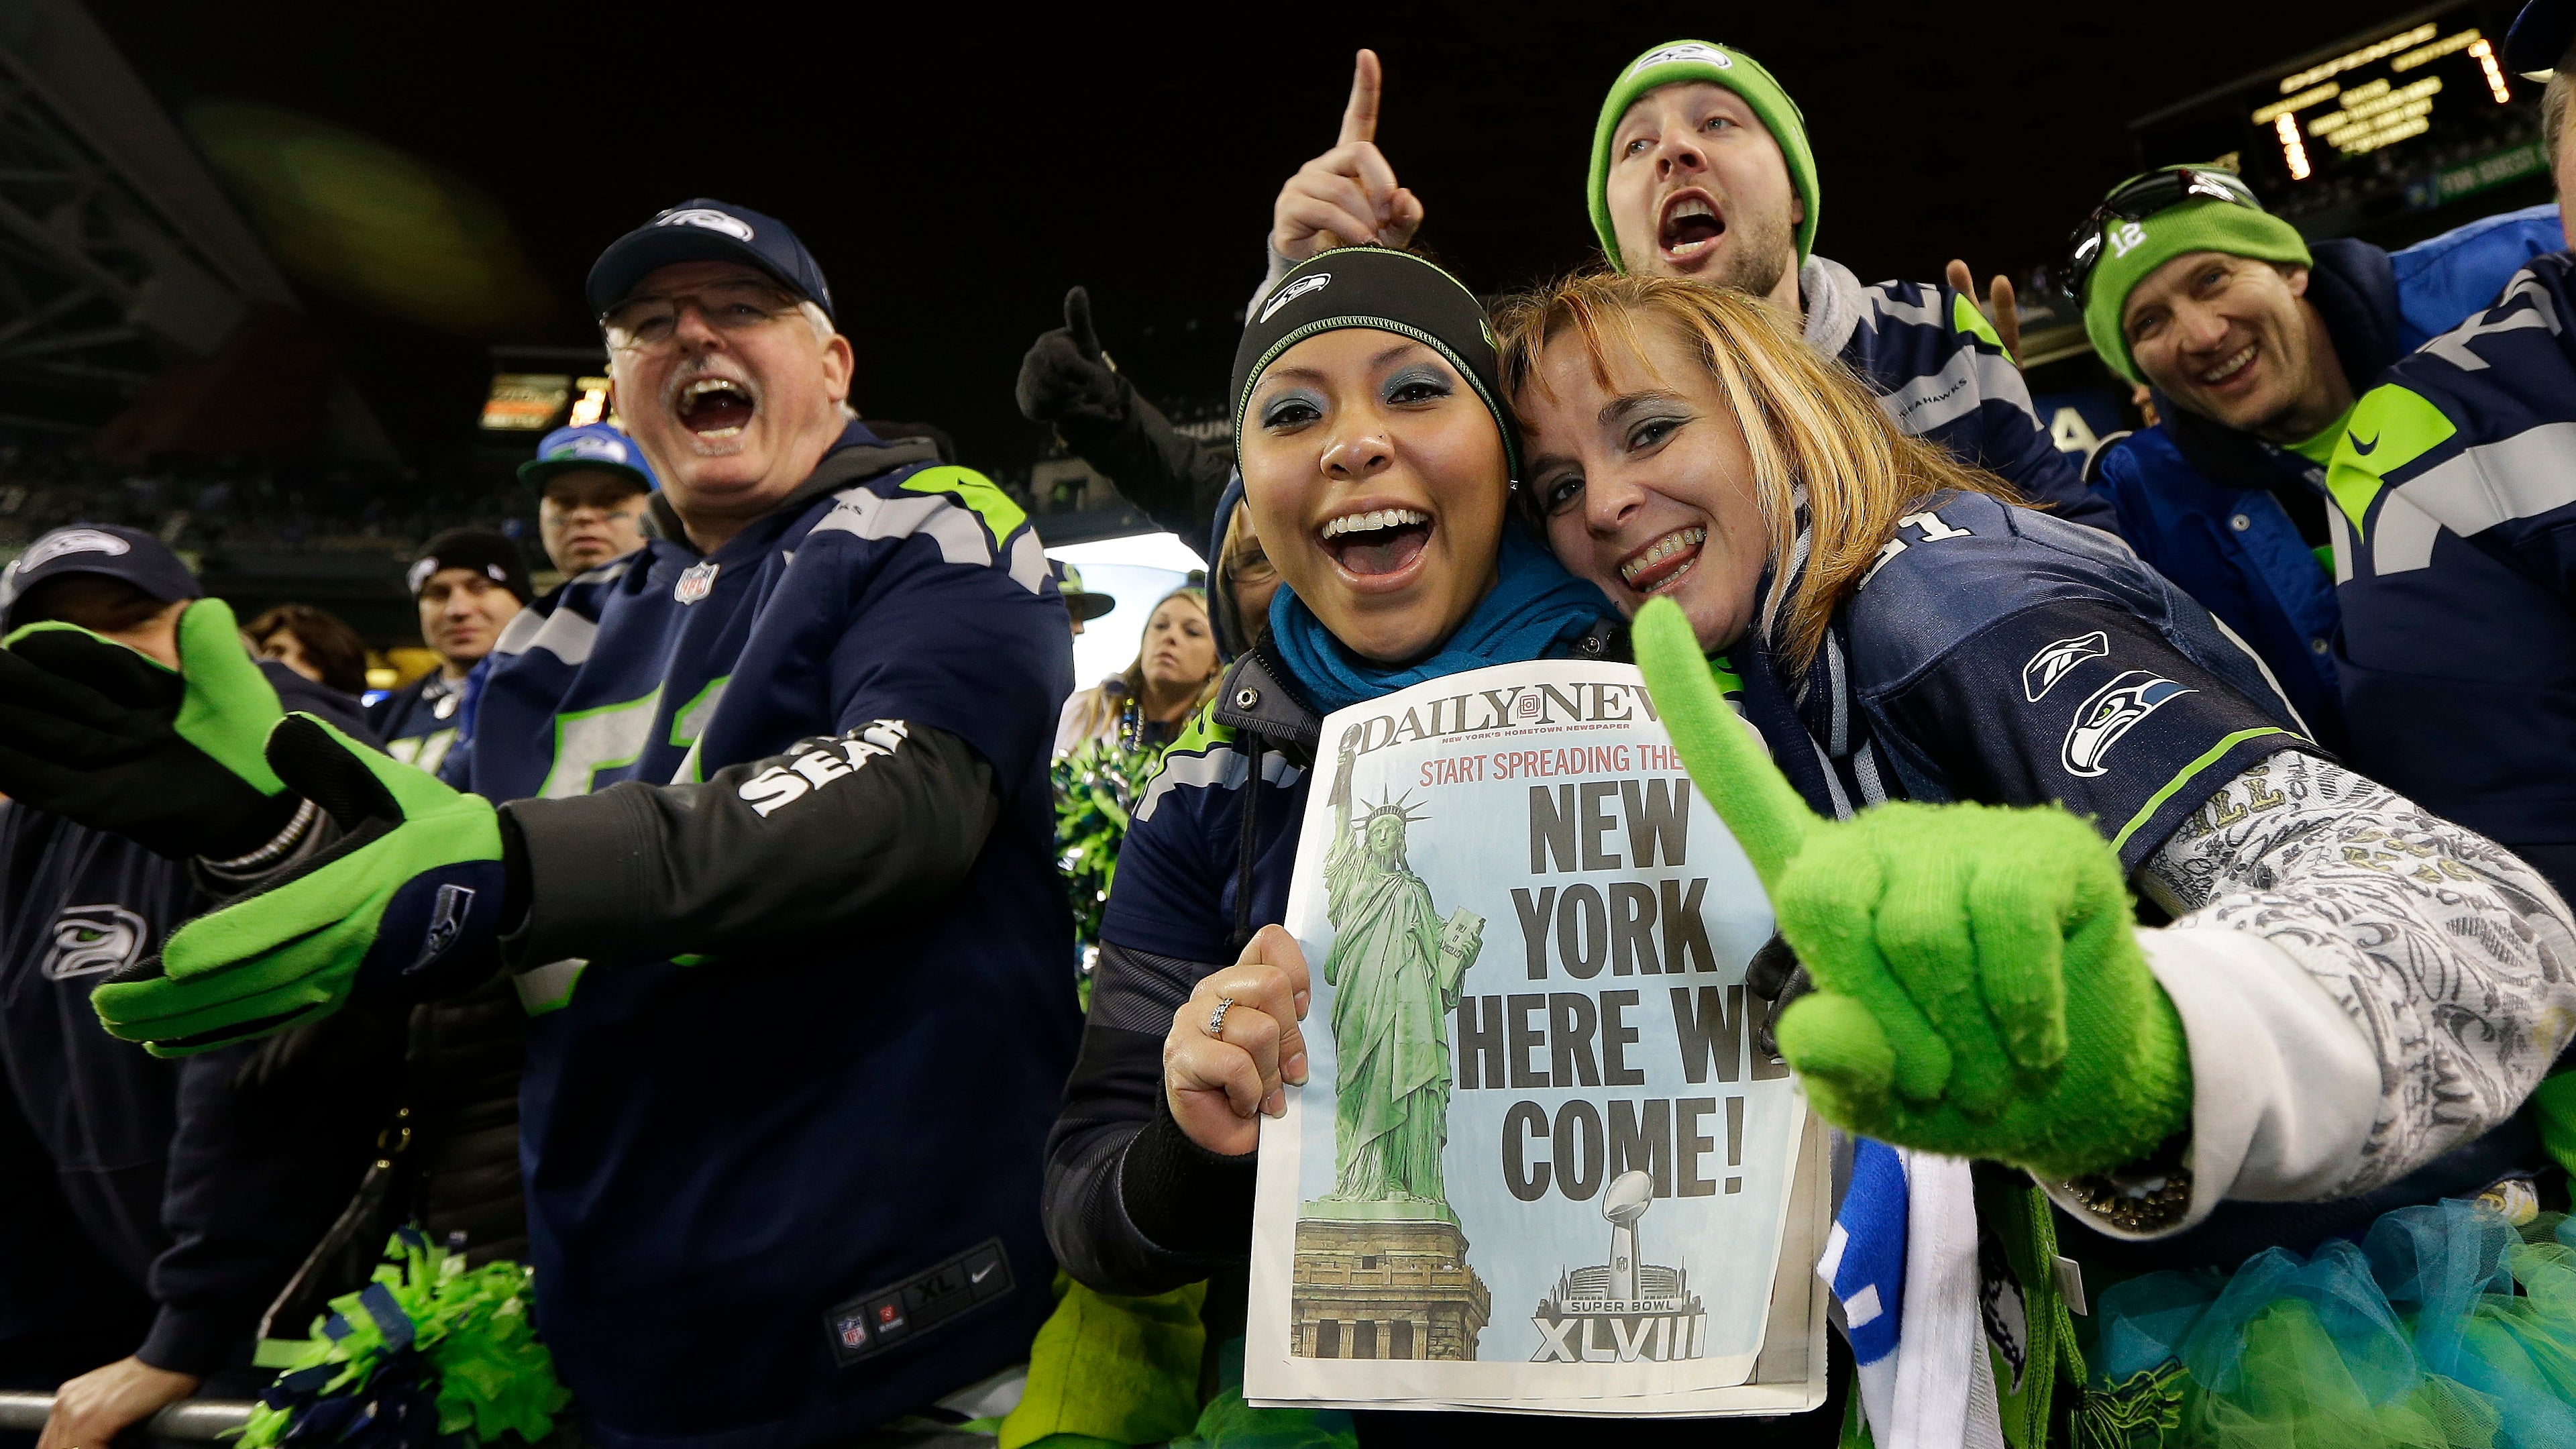  Seattle Seahawks fans celebrate after the NFL football NFC Championship game against the San Francisco 49ers Sunday, Jan. 19, 2014, in Seattle. The Seahawks won 23-17 to advance to Super Bowl XLVIII. (Ted S. Warren/AP Photo) 